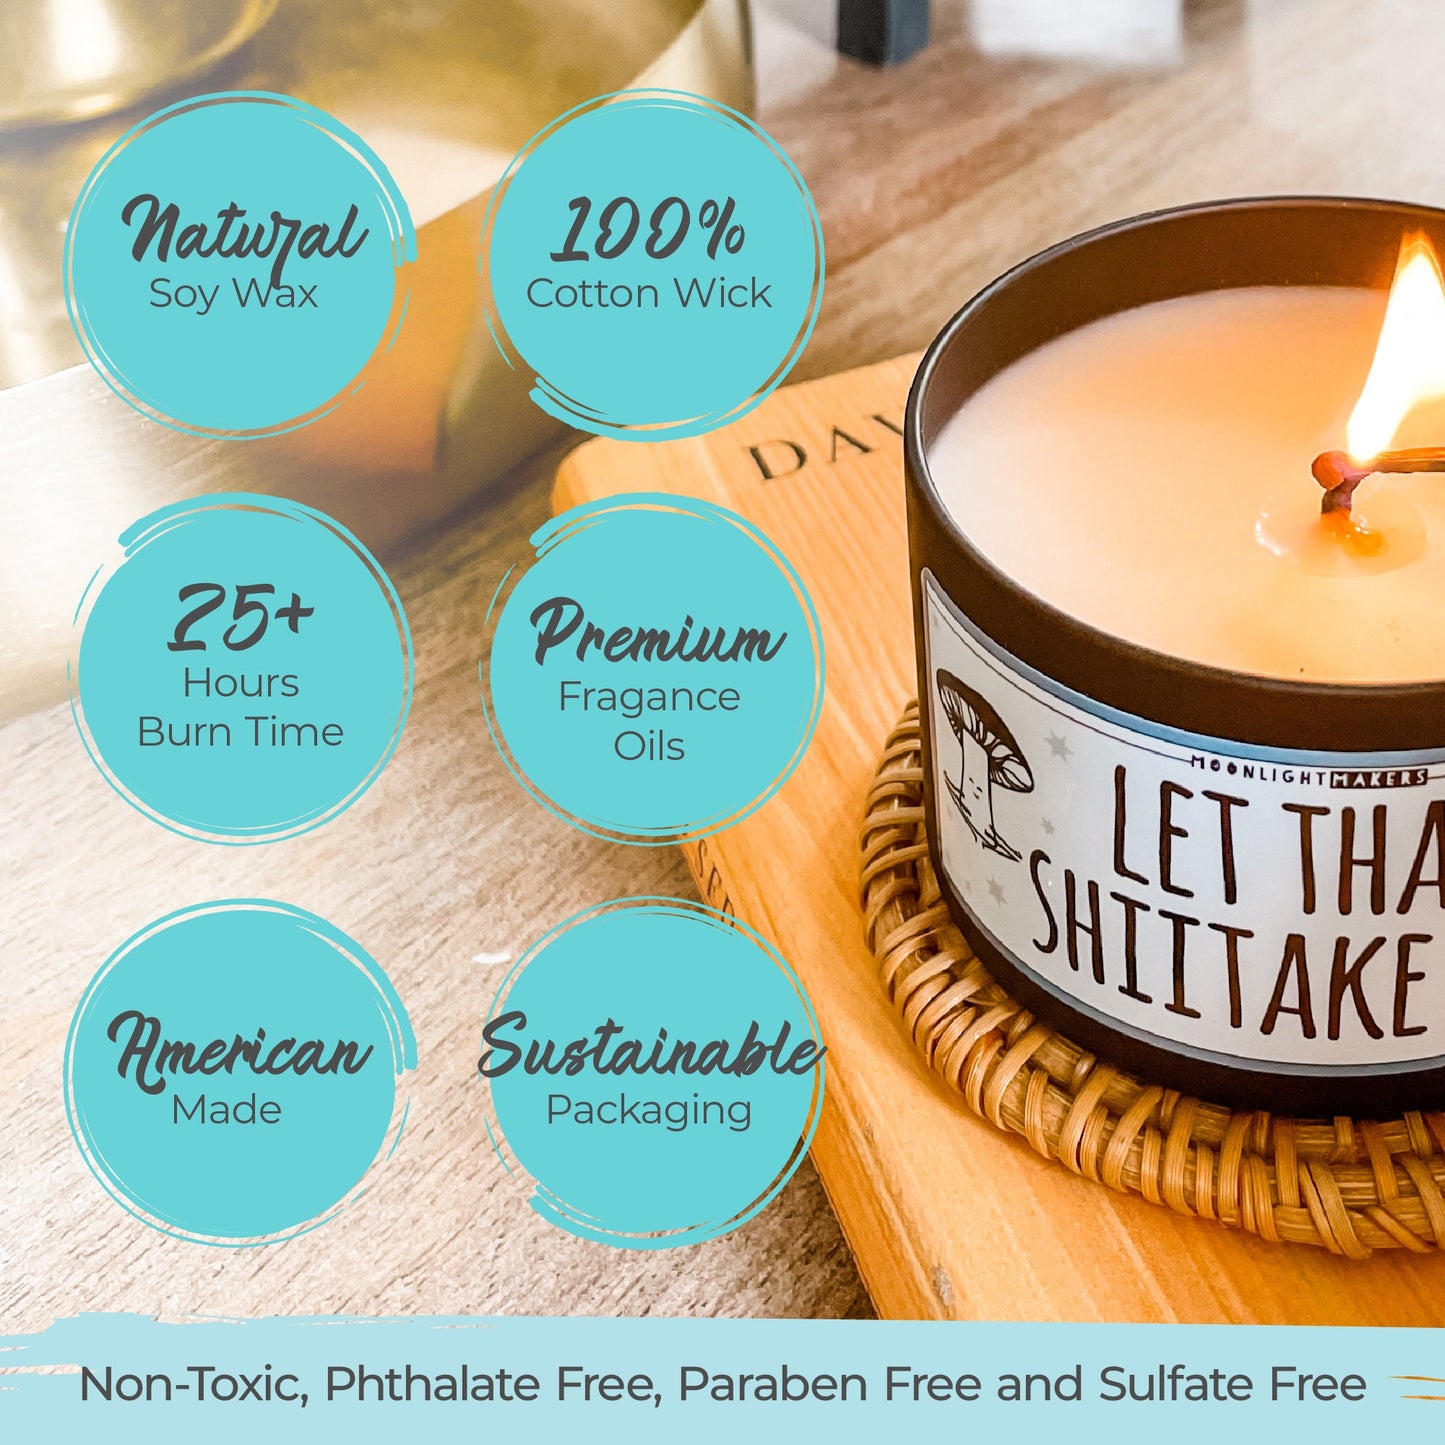 Let That Shiitake Go - 8oz Rose Gold Candle - Vanilla Breeze - 100% Natural Soy Wax